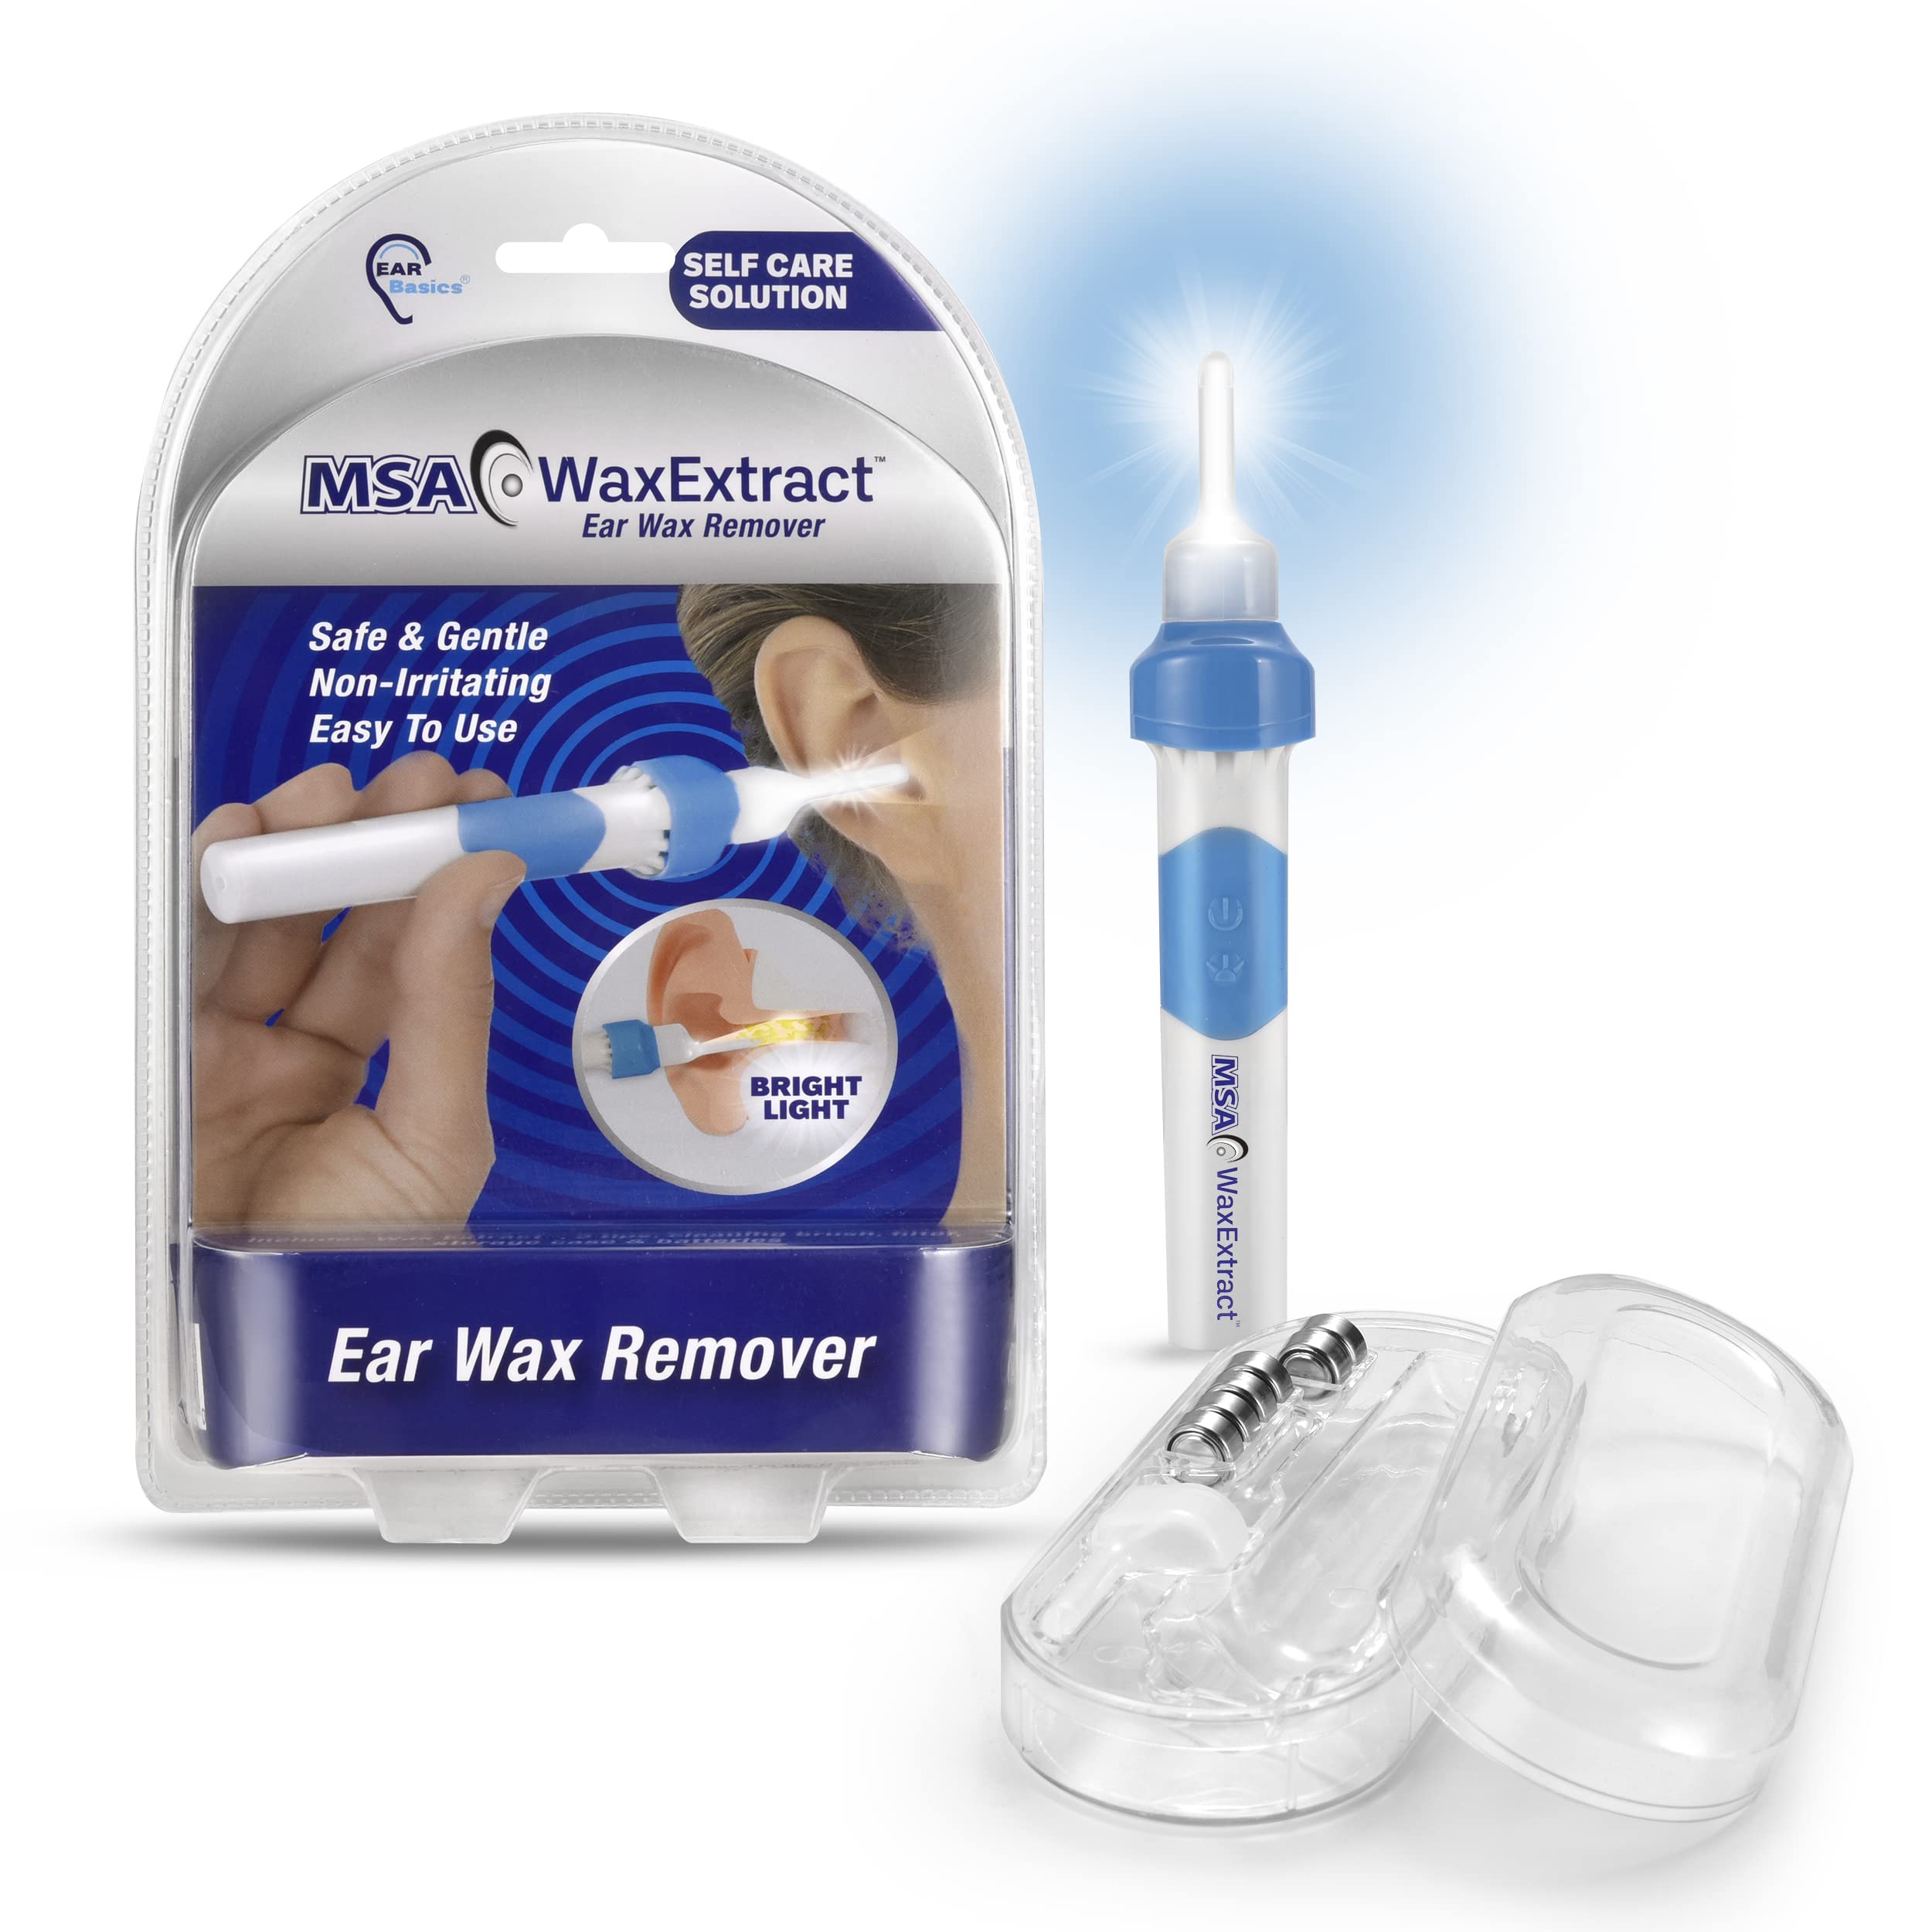 Wax Extract Ear Wax Remover w/ 2 Flexible Tips LED Light & Cleaning Brush, Safe Effective Ear Wax Vibration & Vacuum to Gently Remove Wax Buildup